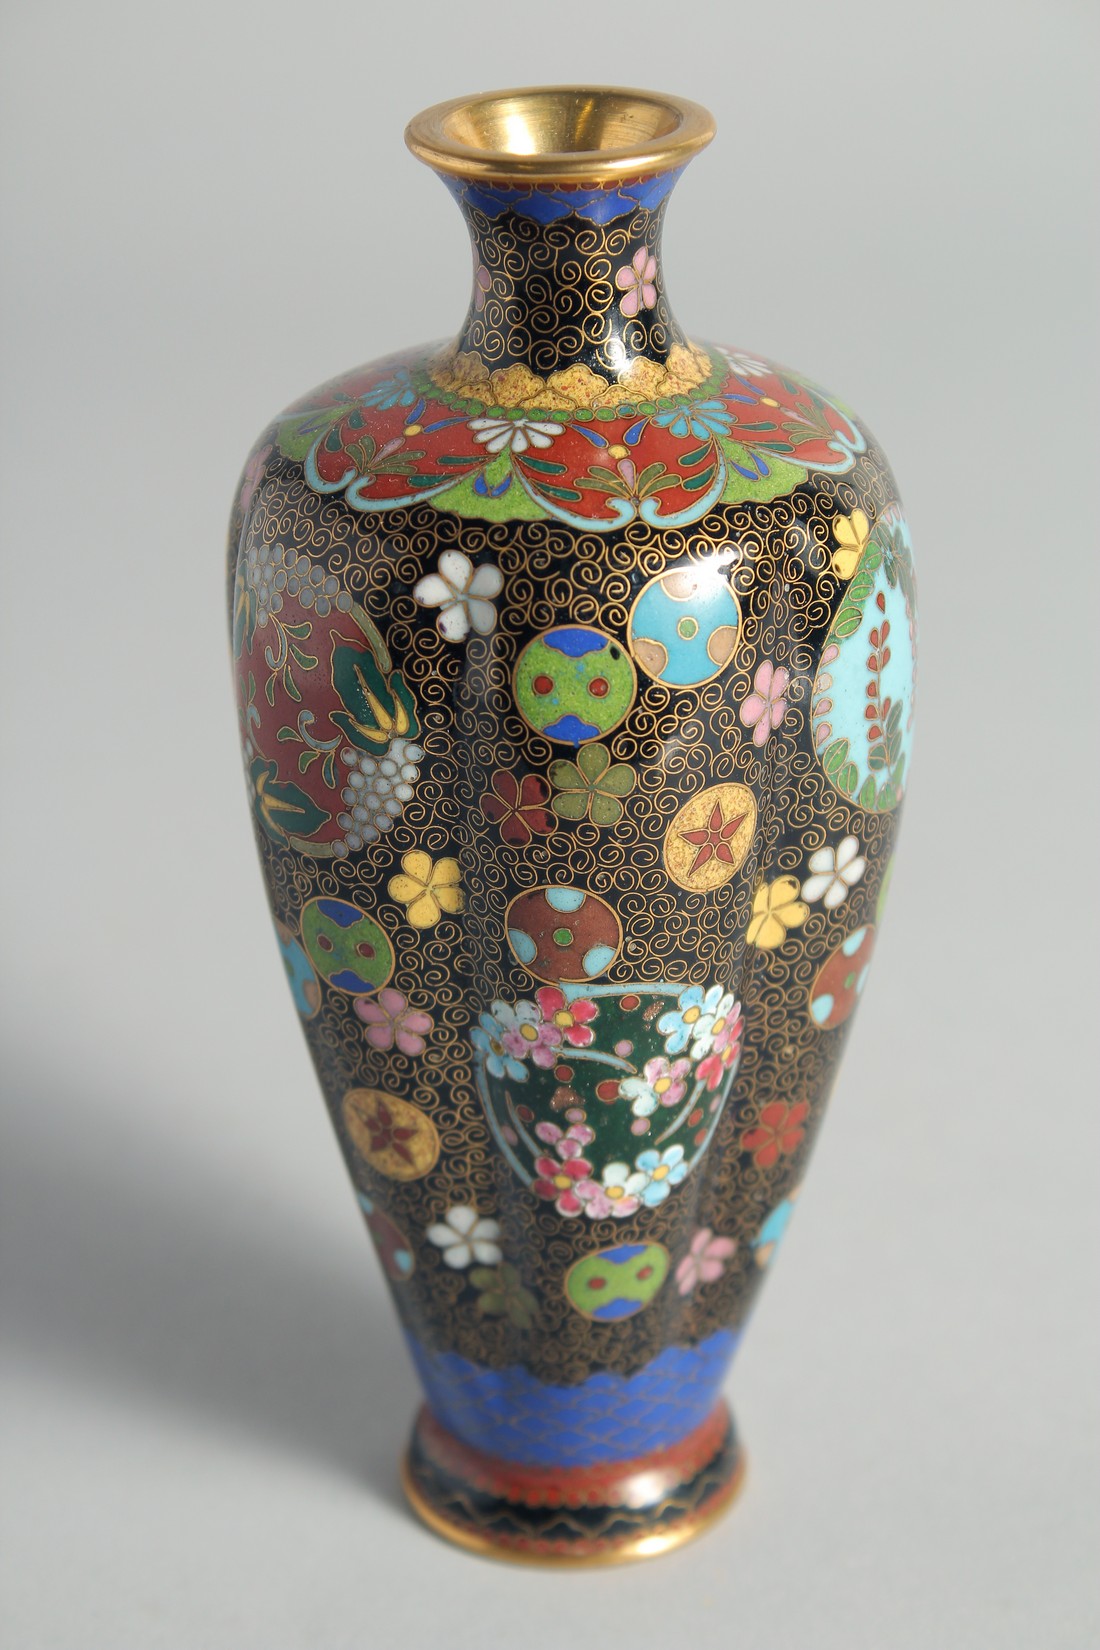 TWO SMALL JAPANESE CLOISONNE VASES, each decorated with floral motifs, 18cm and 15.5cm, together - Image 5 of 9